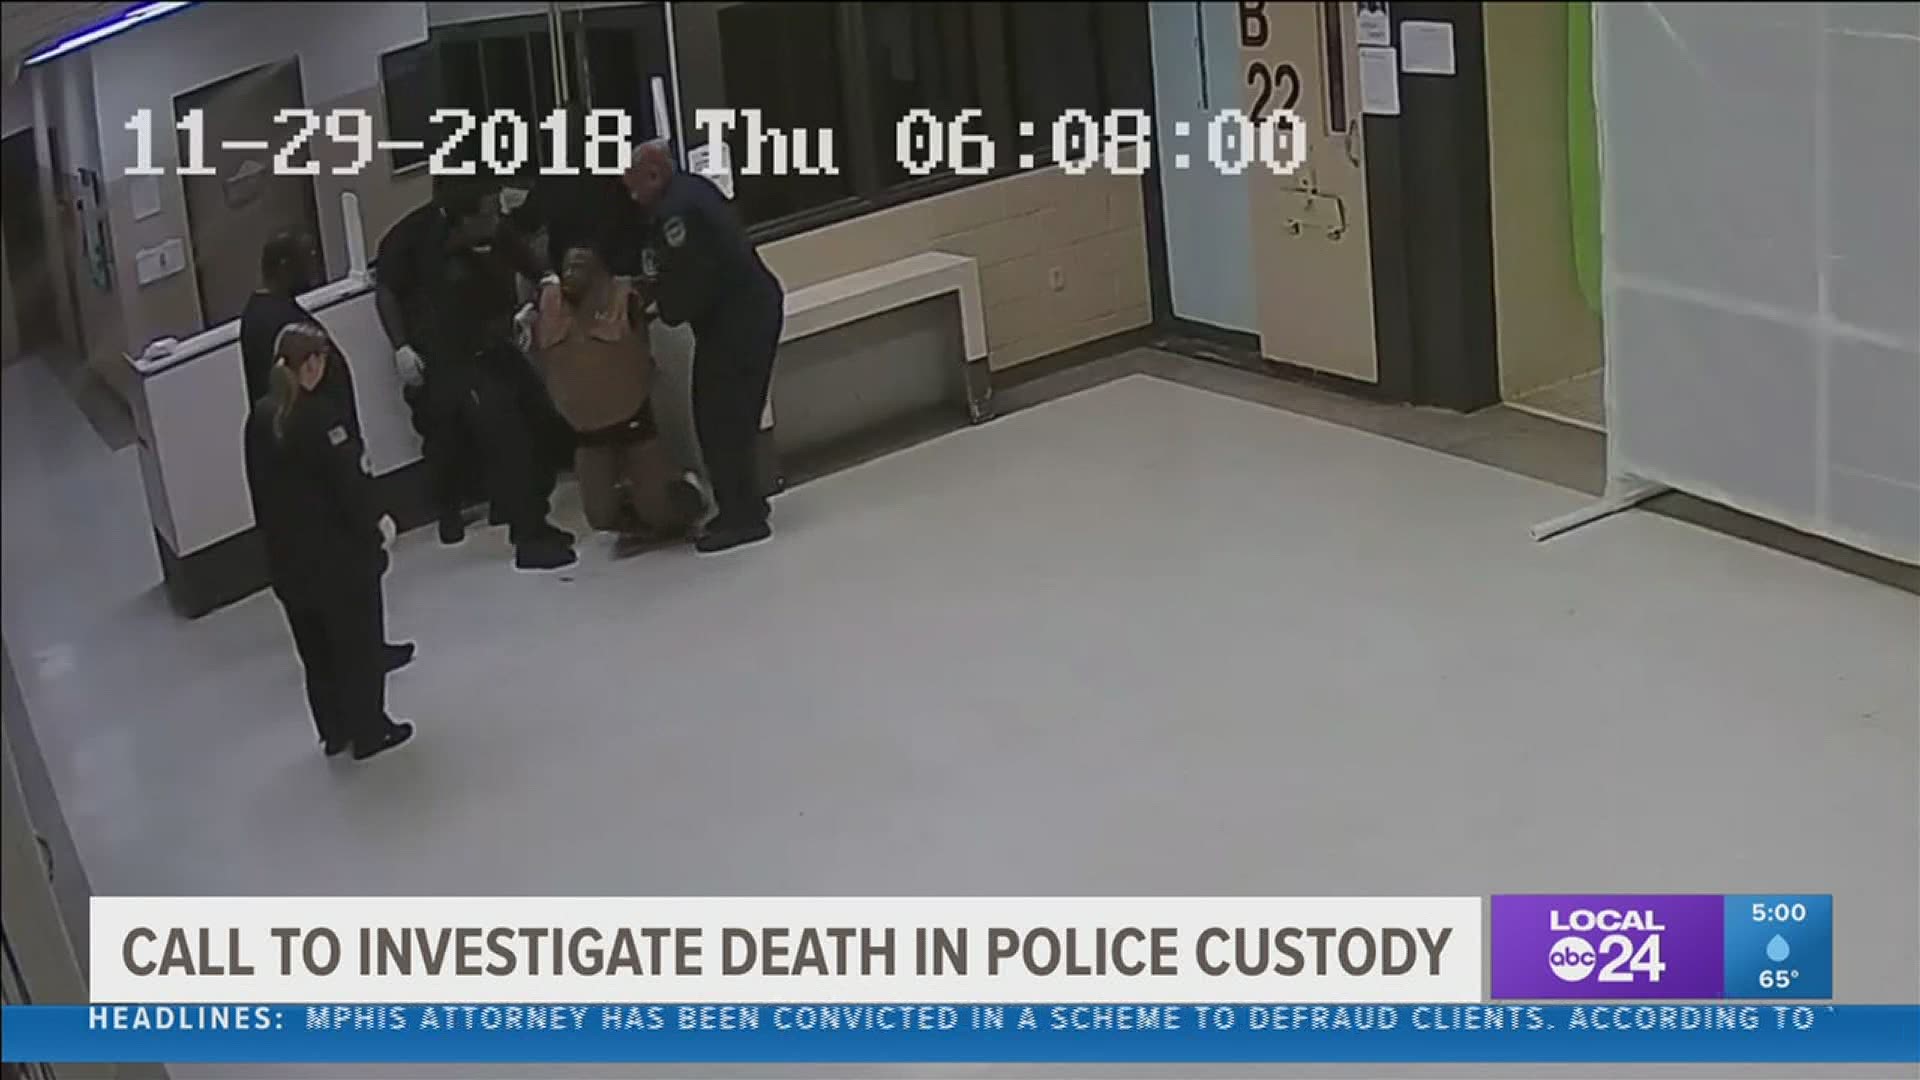 Robert Loggins died November 2018 while in police custody. Video from security cameras show him unconscious after being piled on by multiple officers.